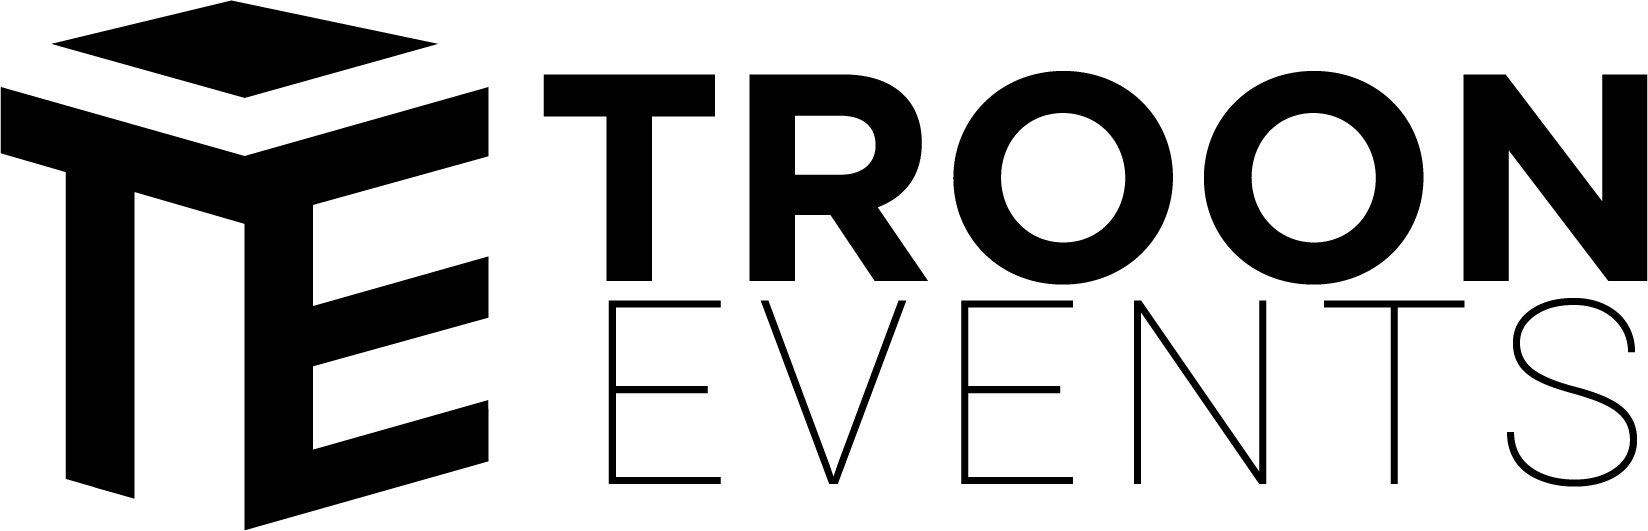  TE TROON EVENTS